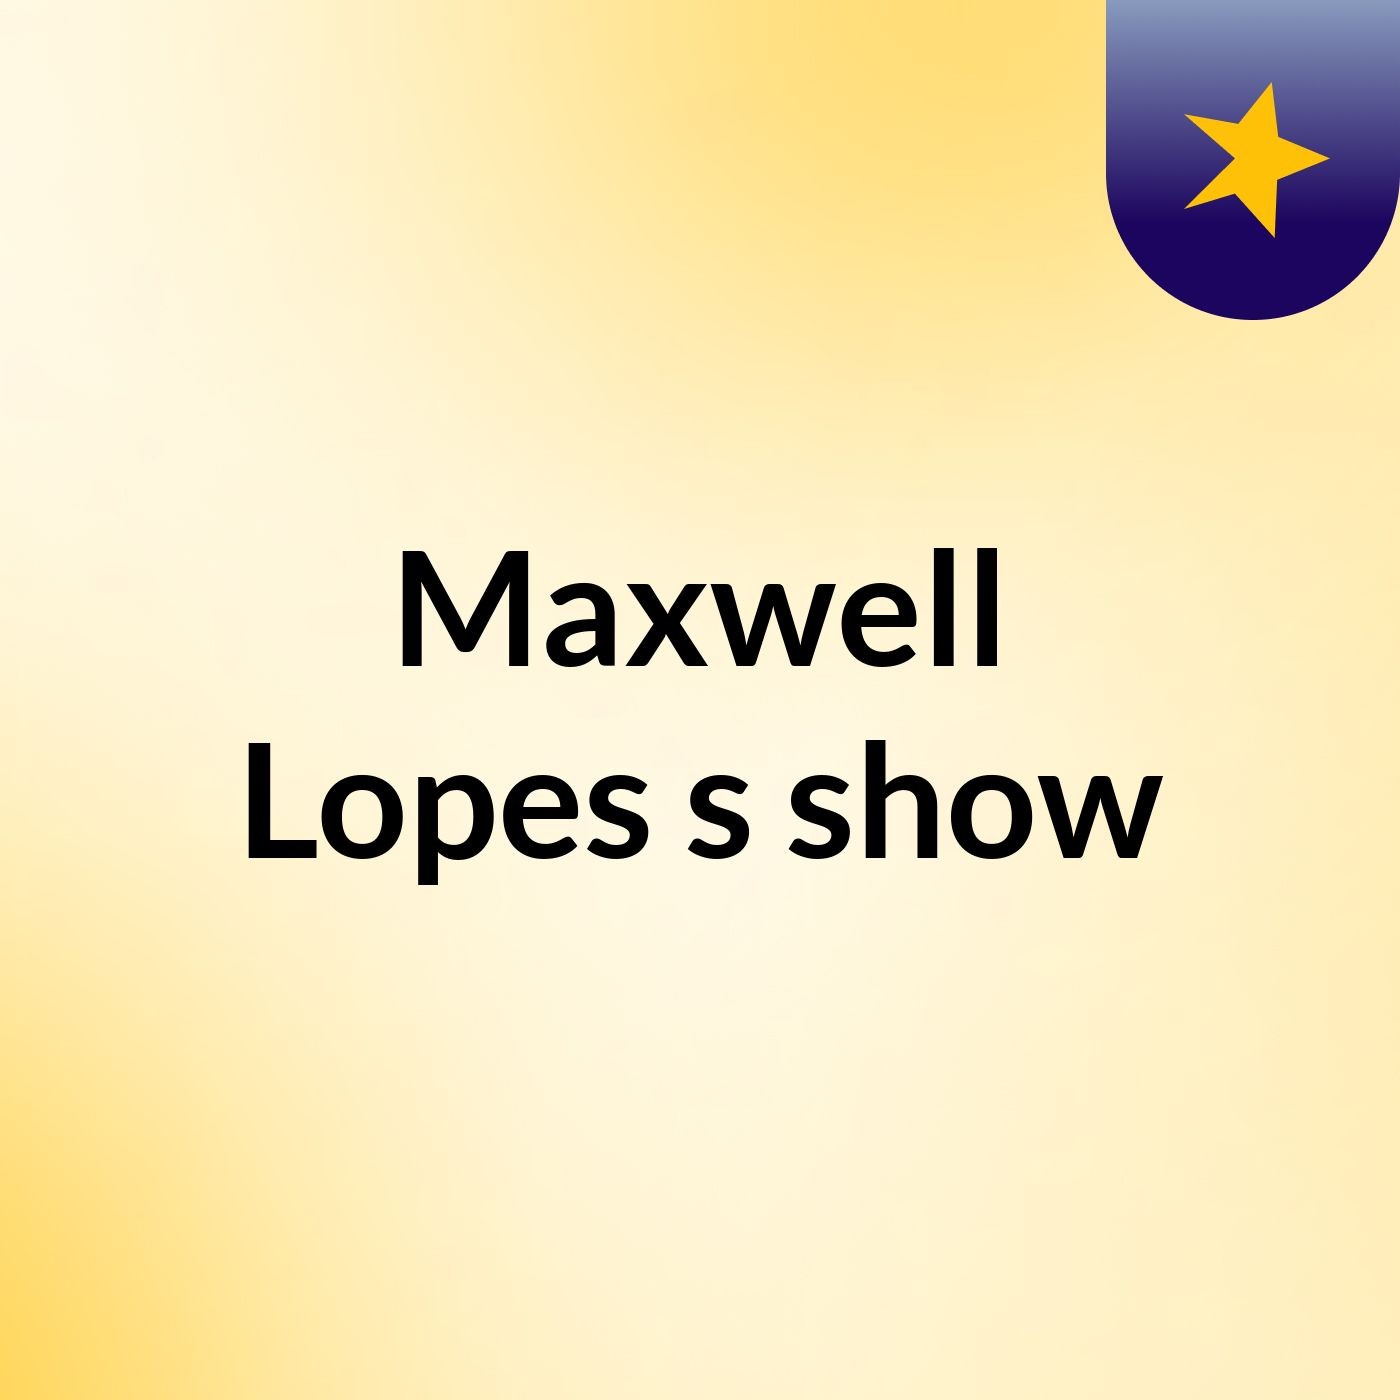 Maxwell Lopes's show